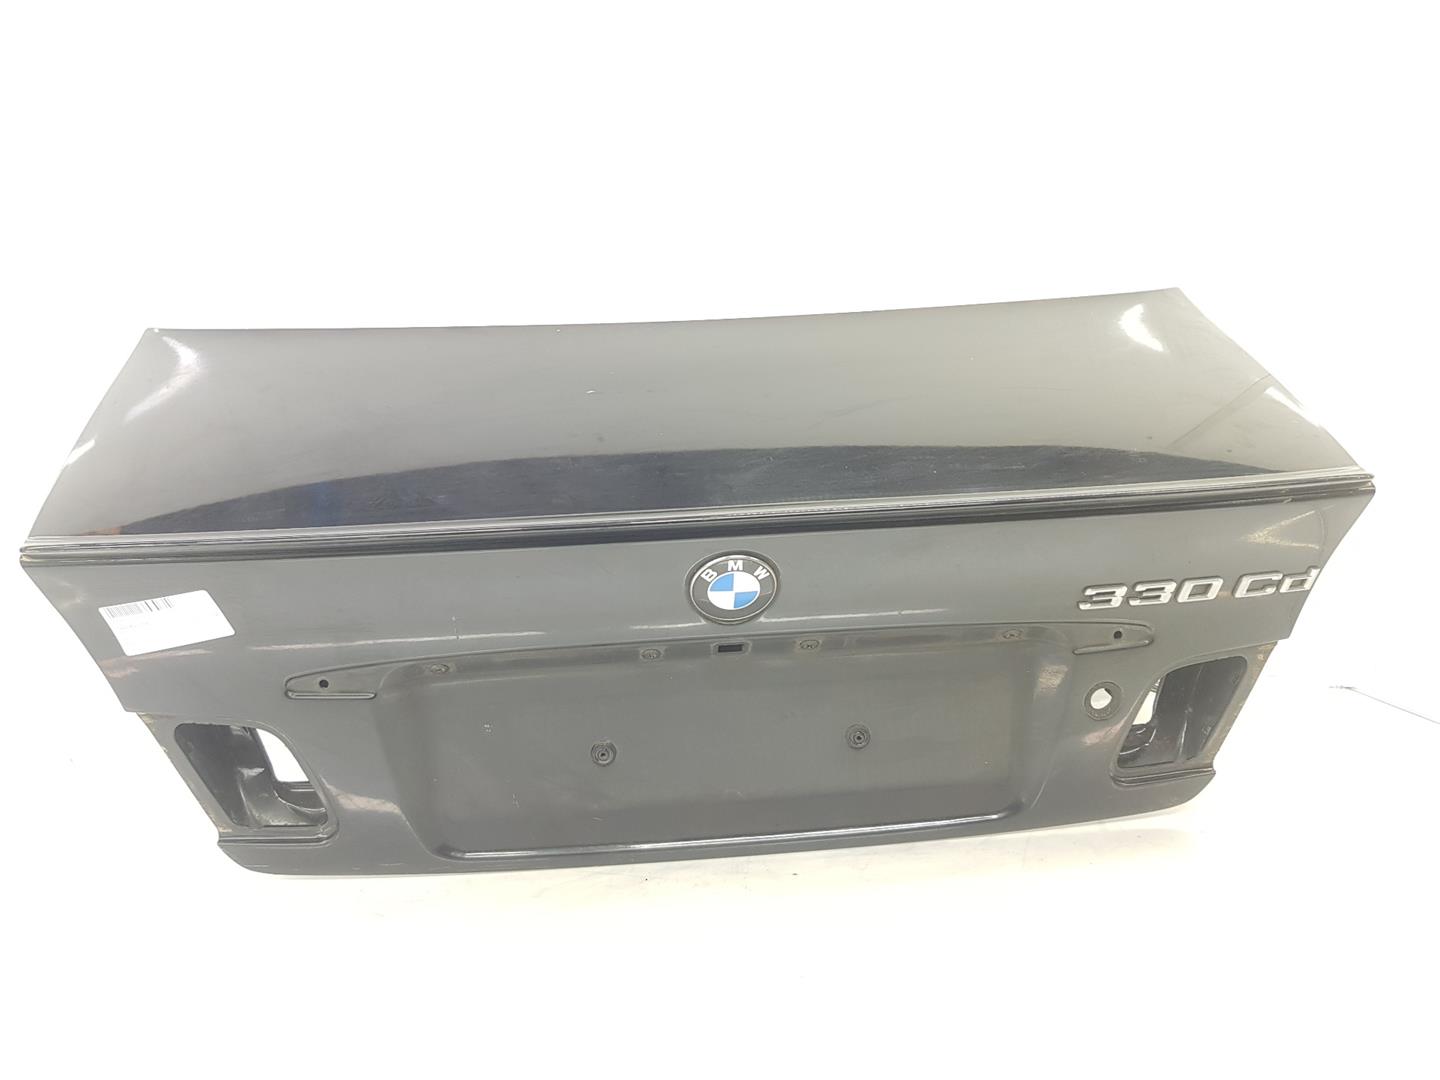 BMW 3 Series E46 (1997-2006) Bootlid Rear Boot 41627065260, 41627065260 19792316